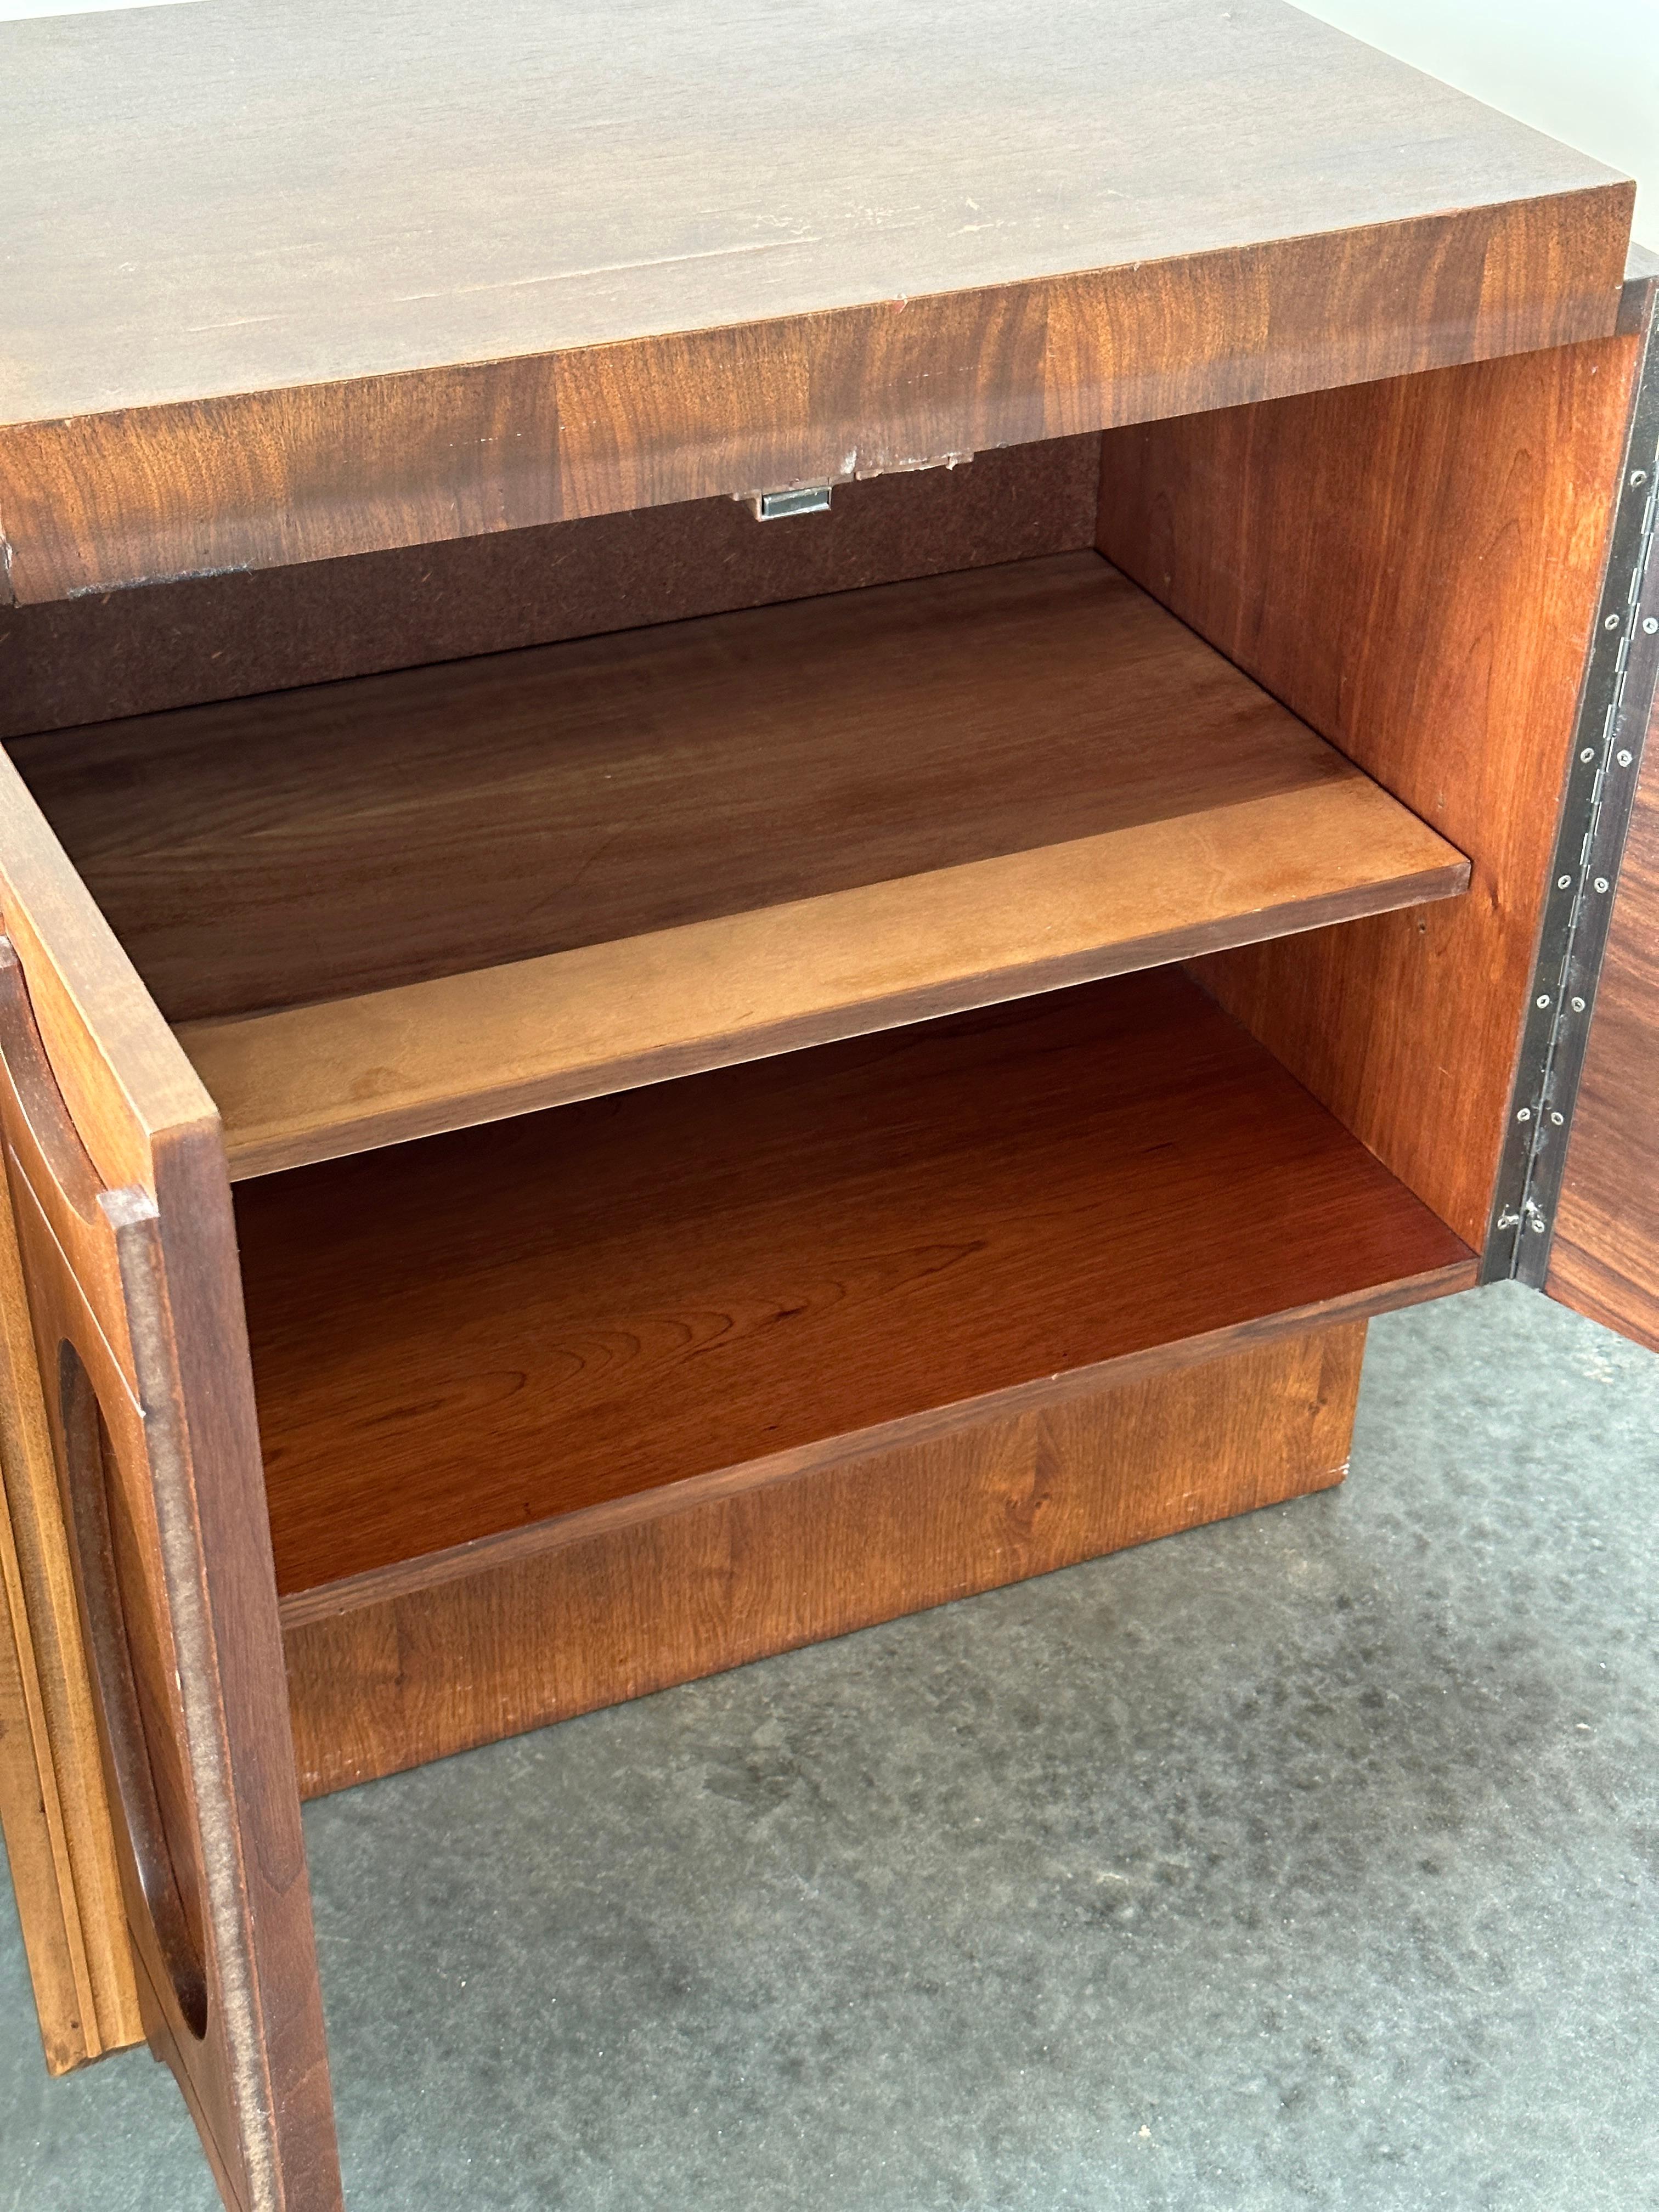 This pair of oiled walnut nightstands is a fine example of Canadian furniture design from the 1970s by Tabago Furniture. Inspired by the brutalist style of American designers like Paul Evans, the front of these nightstands feature doors with a